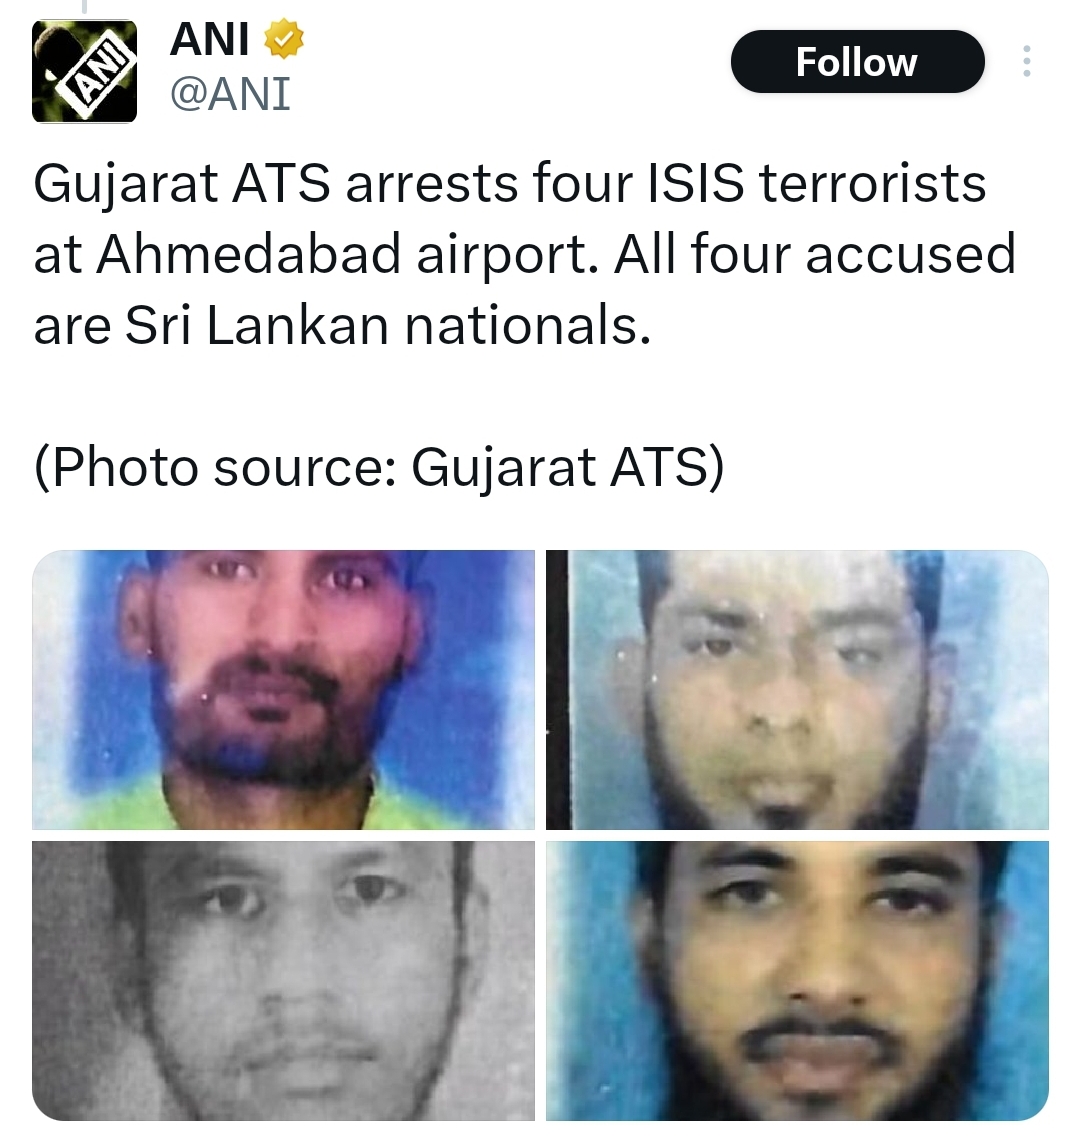 4 ISIS terrorist suspects hailing from Sri Lanka arrested at Indian airport – Hindustan Times